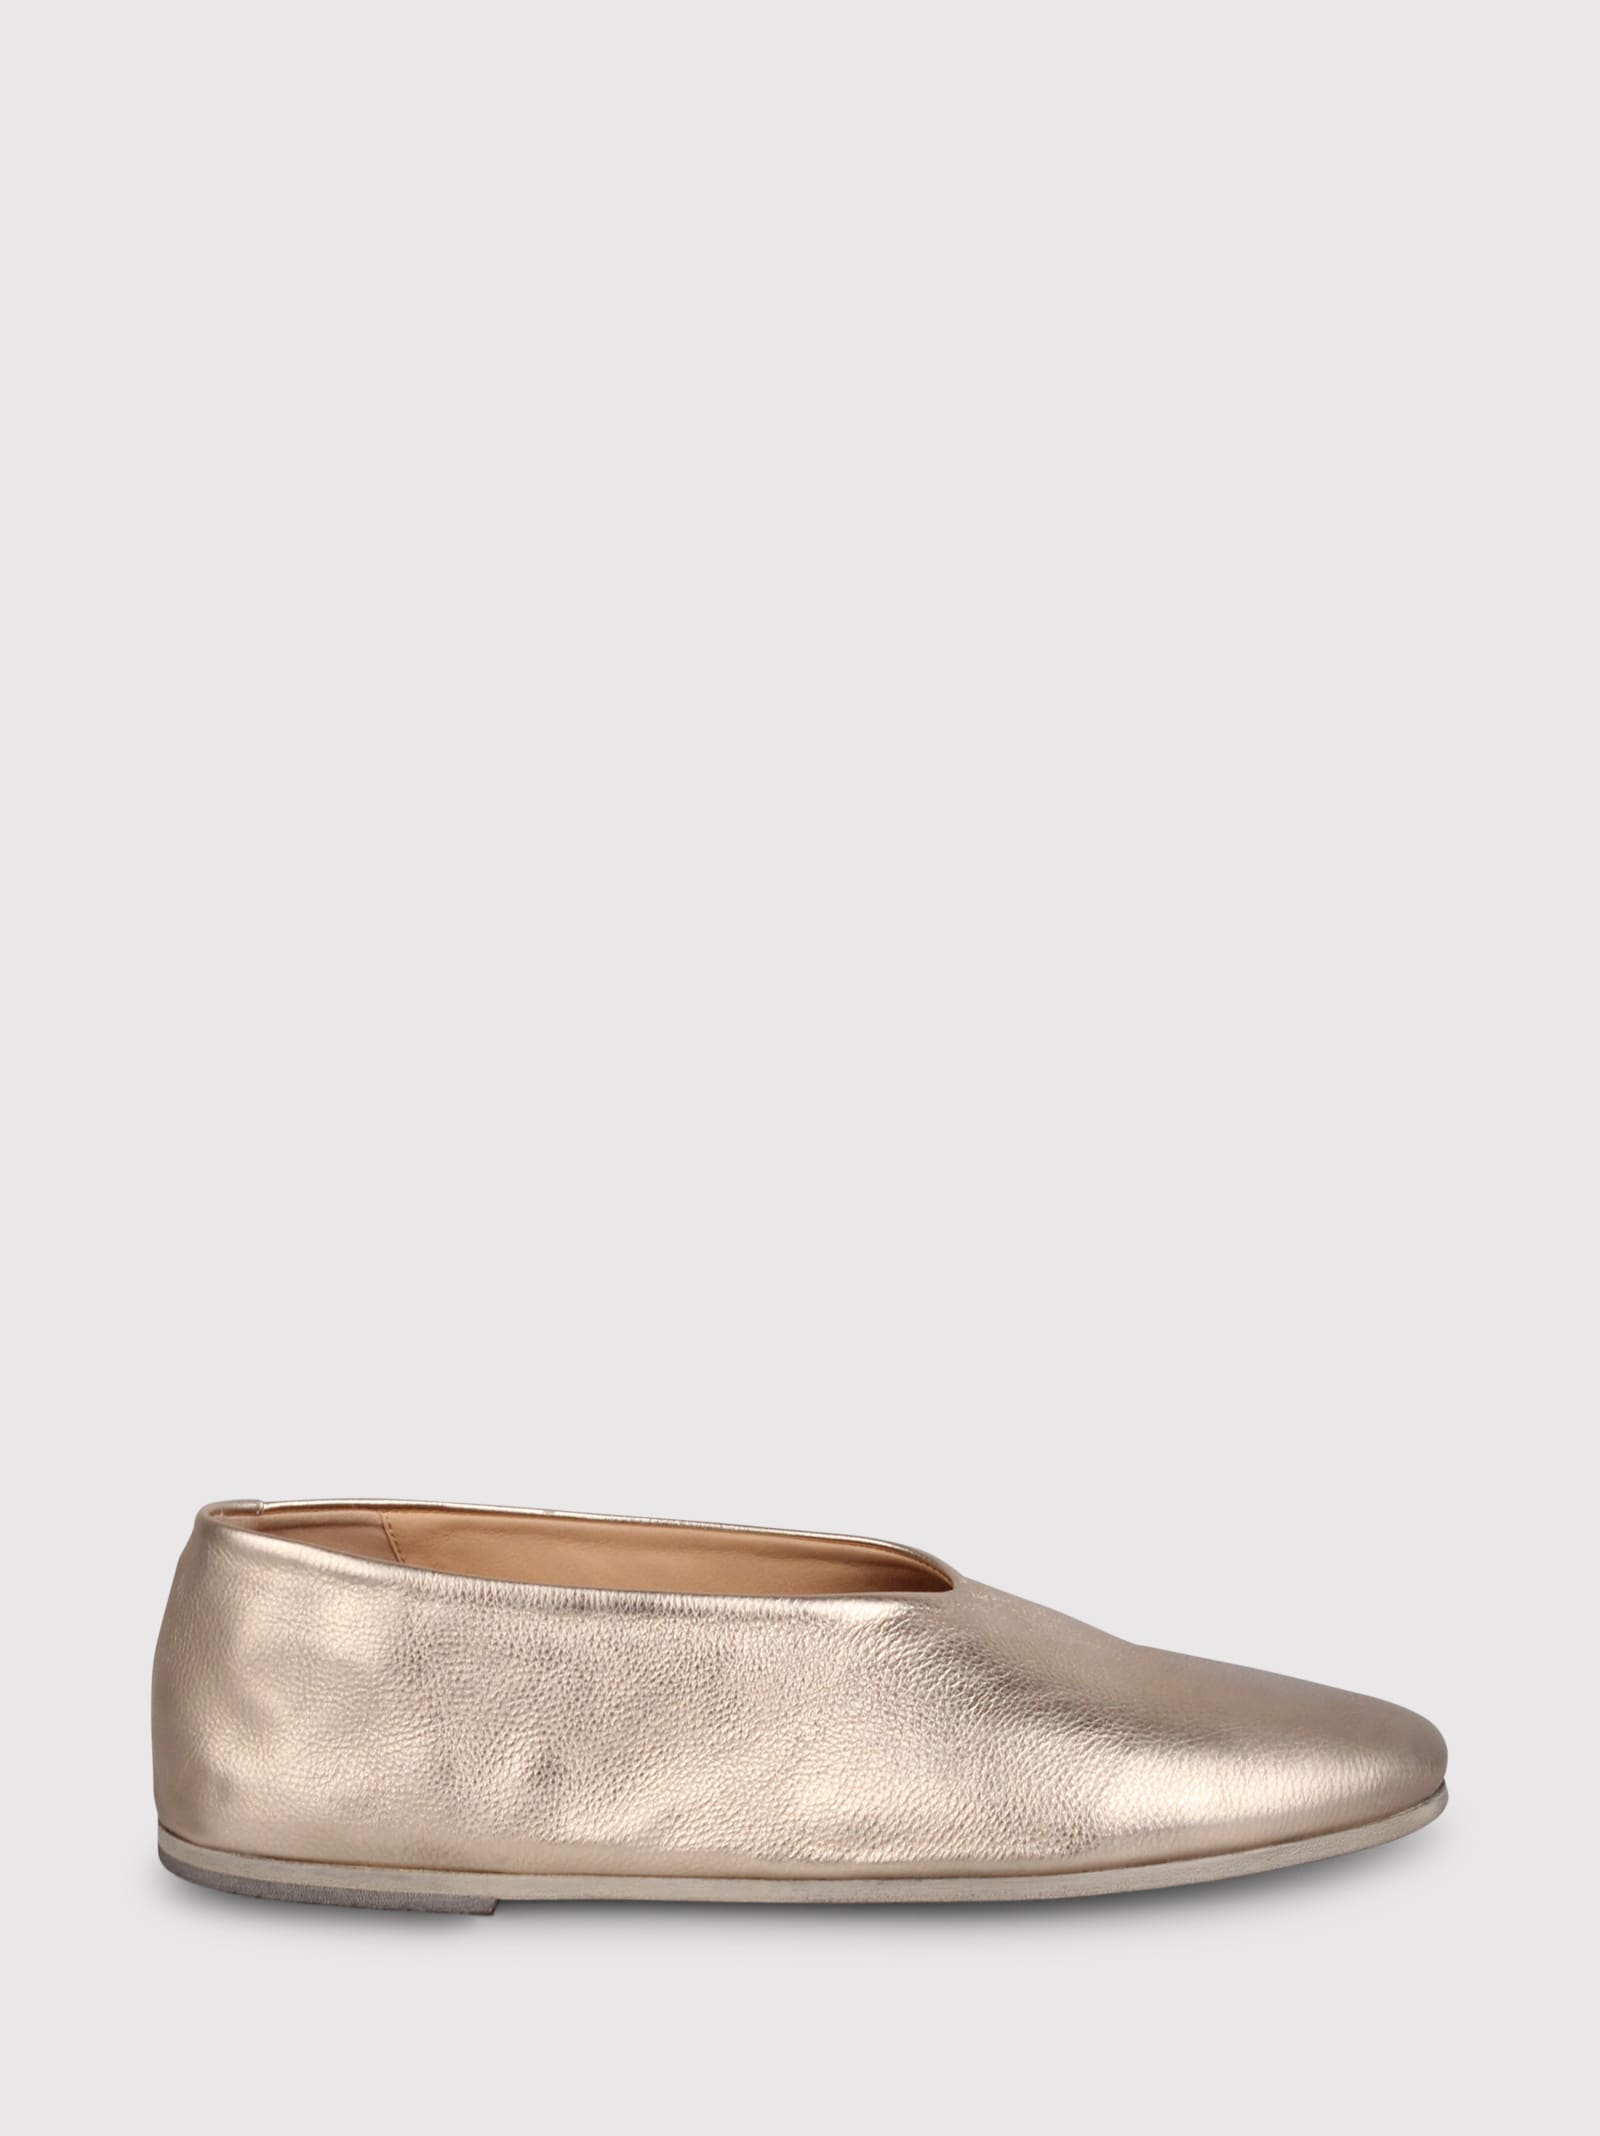 Marsèll Marsell Almond Toe Ballerina Shoes In White